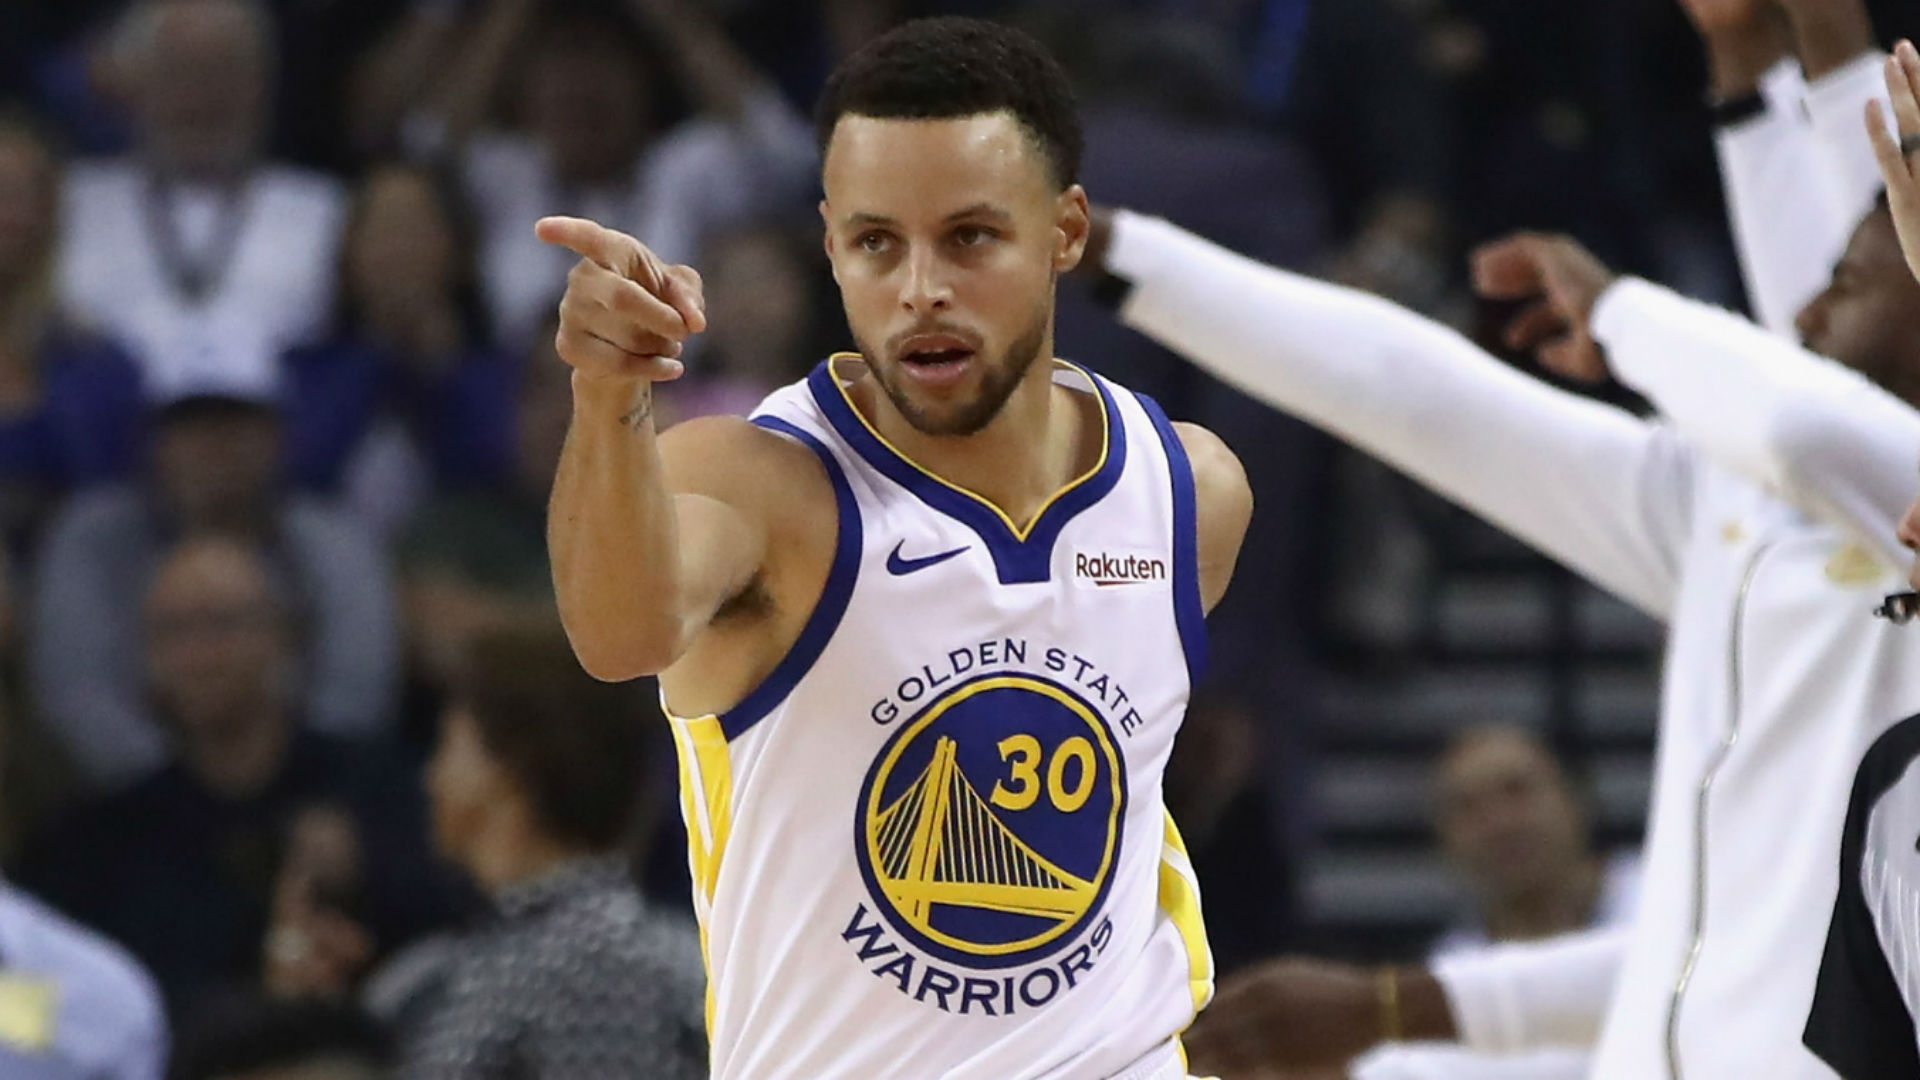 A Golden State Warriors team that has dominated the NBA has undergone significant change, but that excites Stephen Curry.